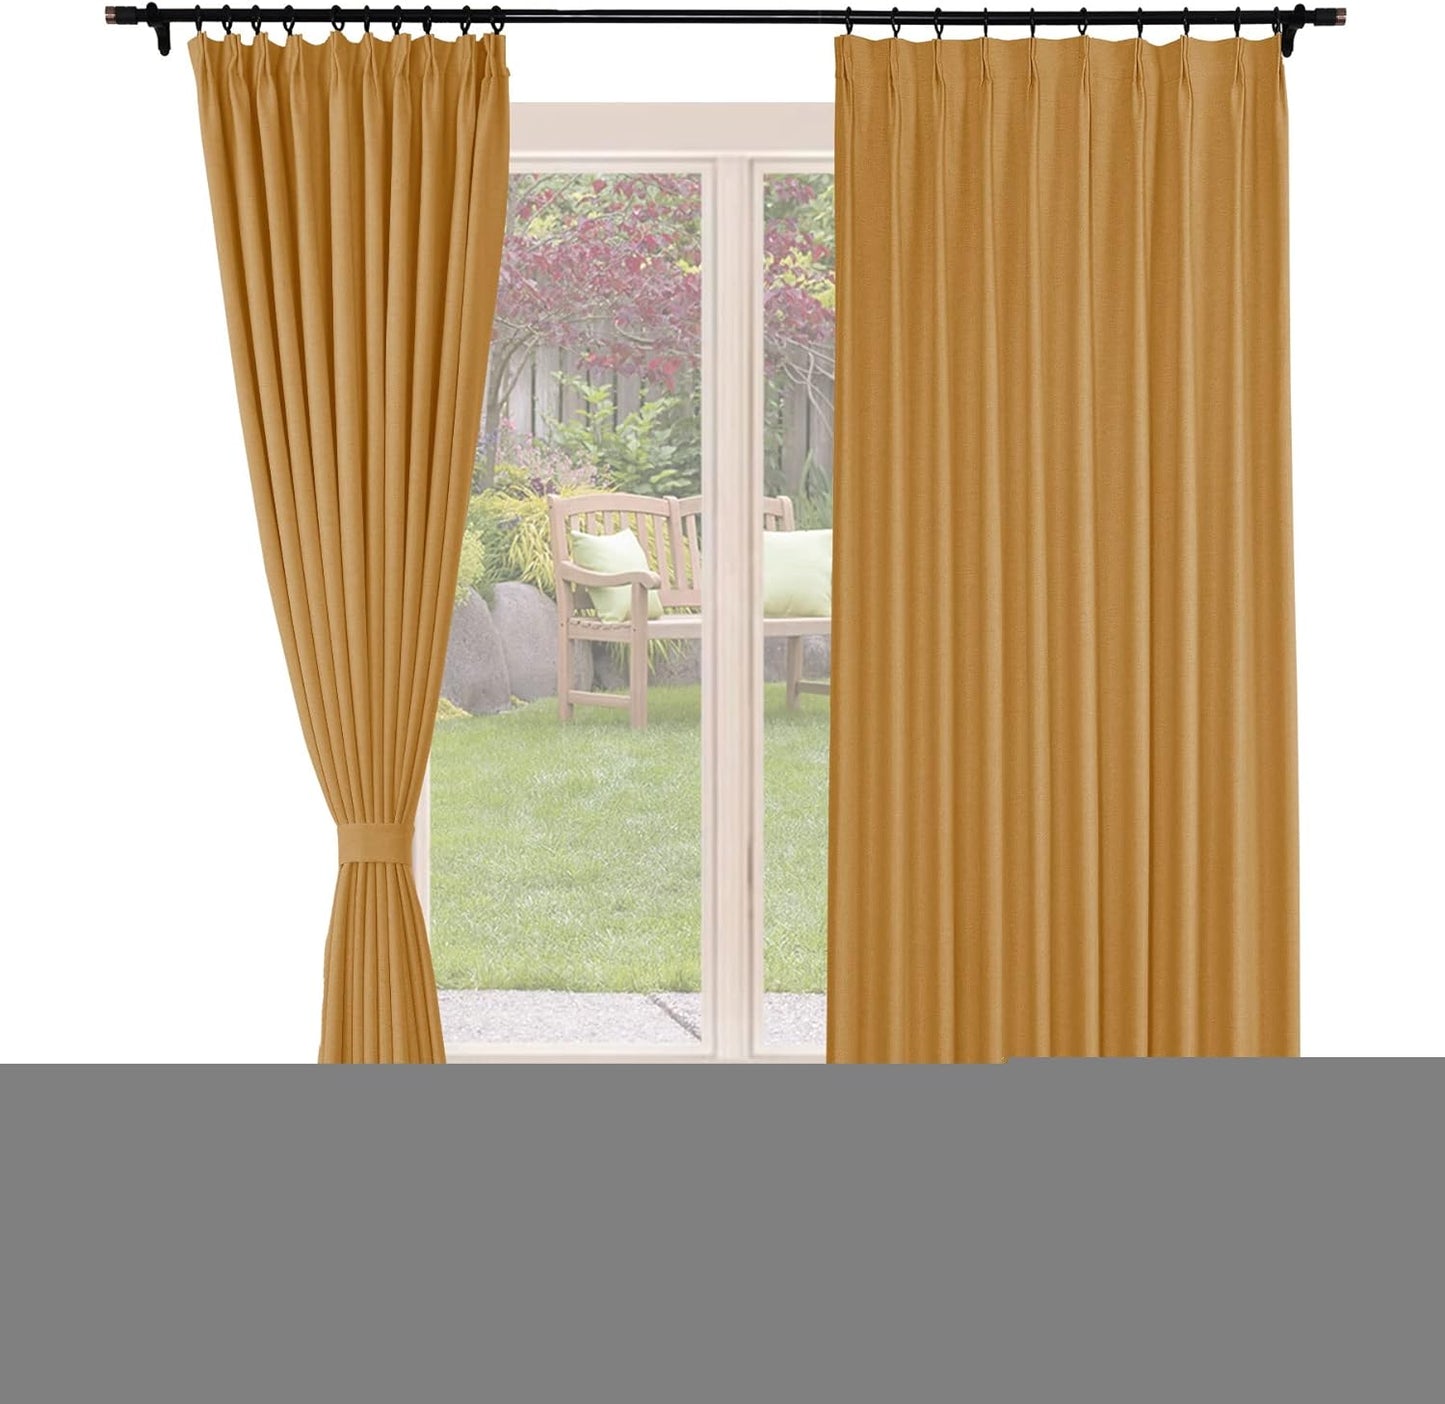 Frelement Blackout Curtains Natural Linen Curtains Pinch Pleat Drapery Panels for Living Room Thermal Insulated Curtains, 52" W X 63" L, 2 Panels, Oasis  Frelement 22 Orange (52Wx63L Inch)*2 